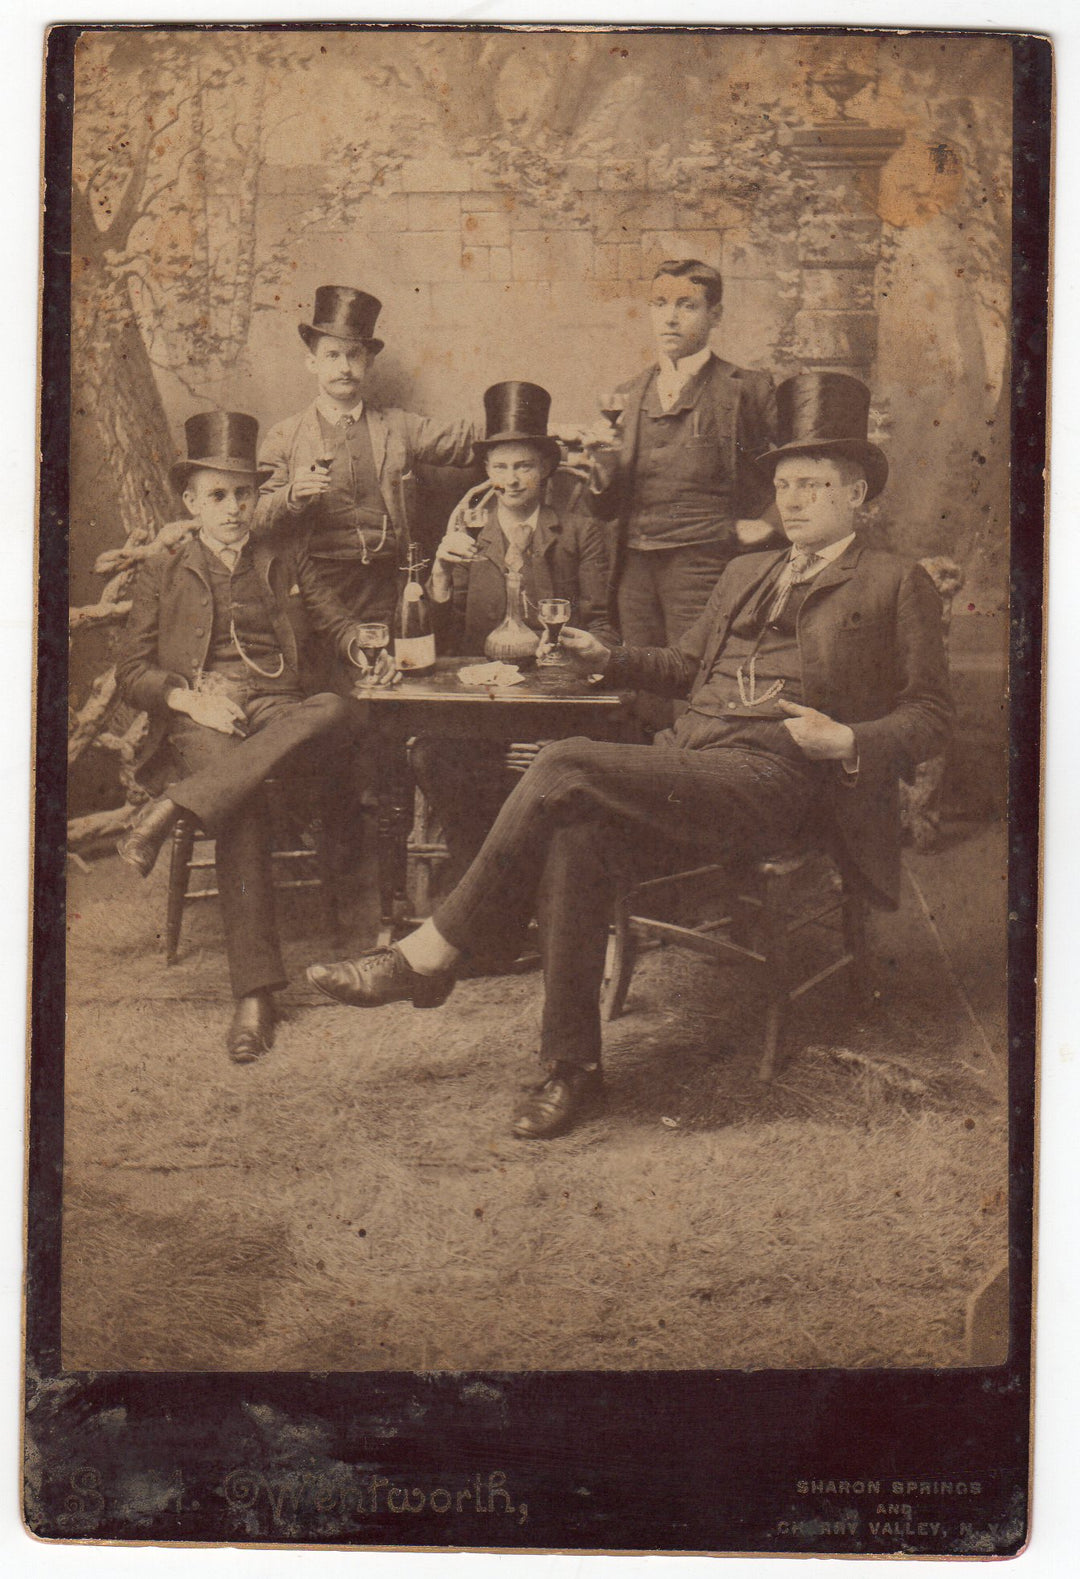 Young Men Drinking & Smoking Antique Cabinet Photo - Sharon Springs, New York